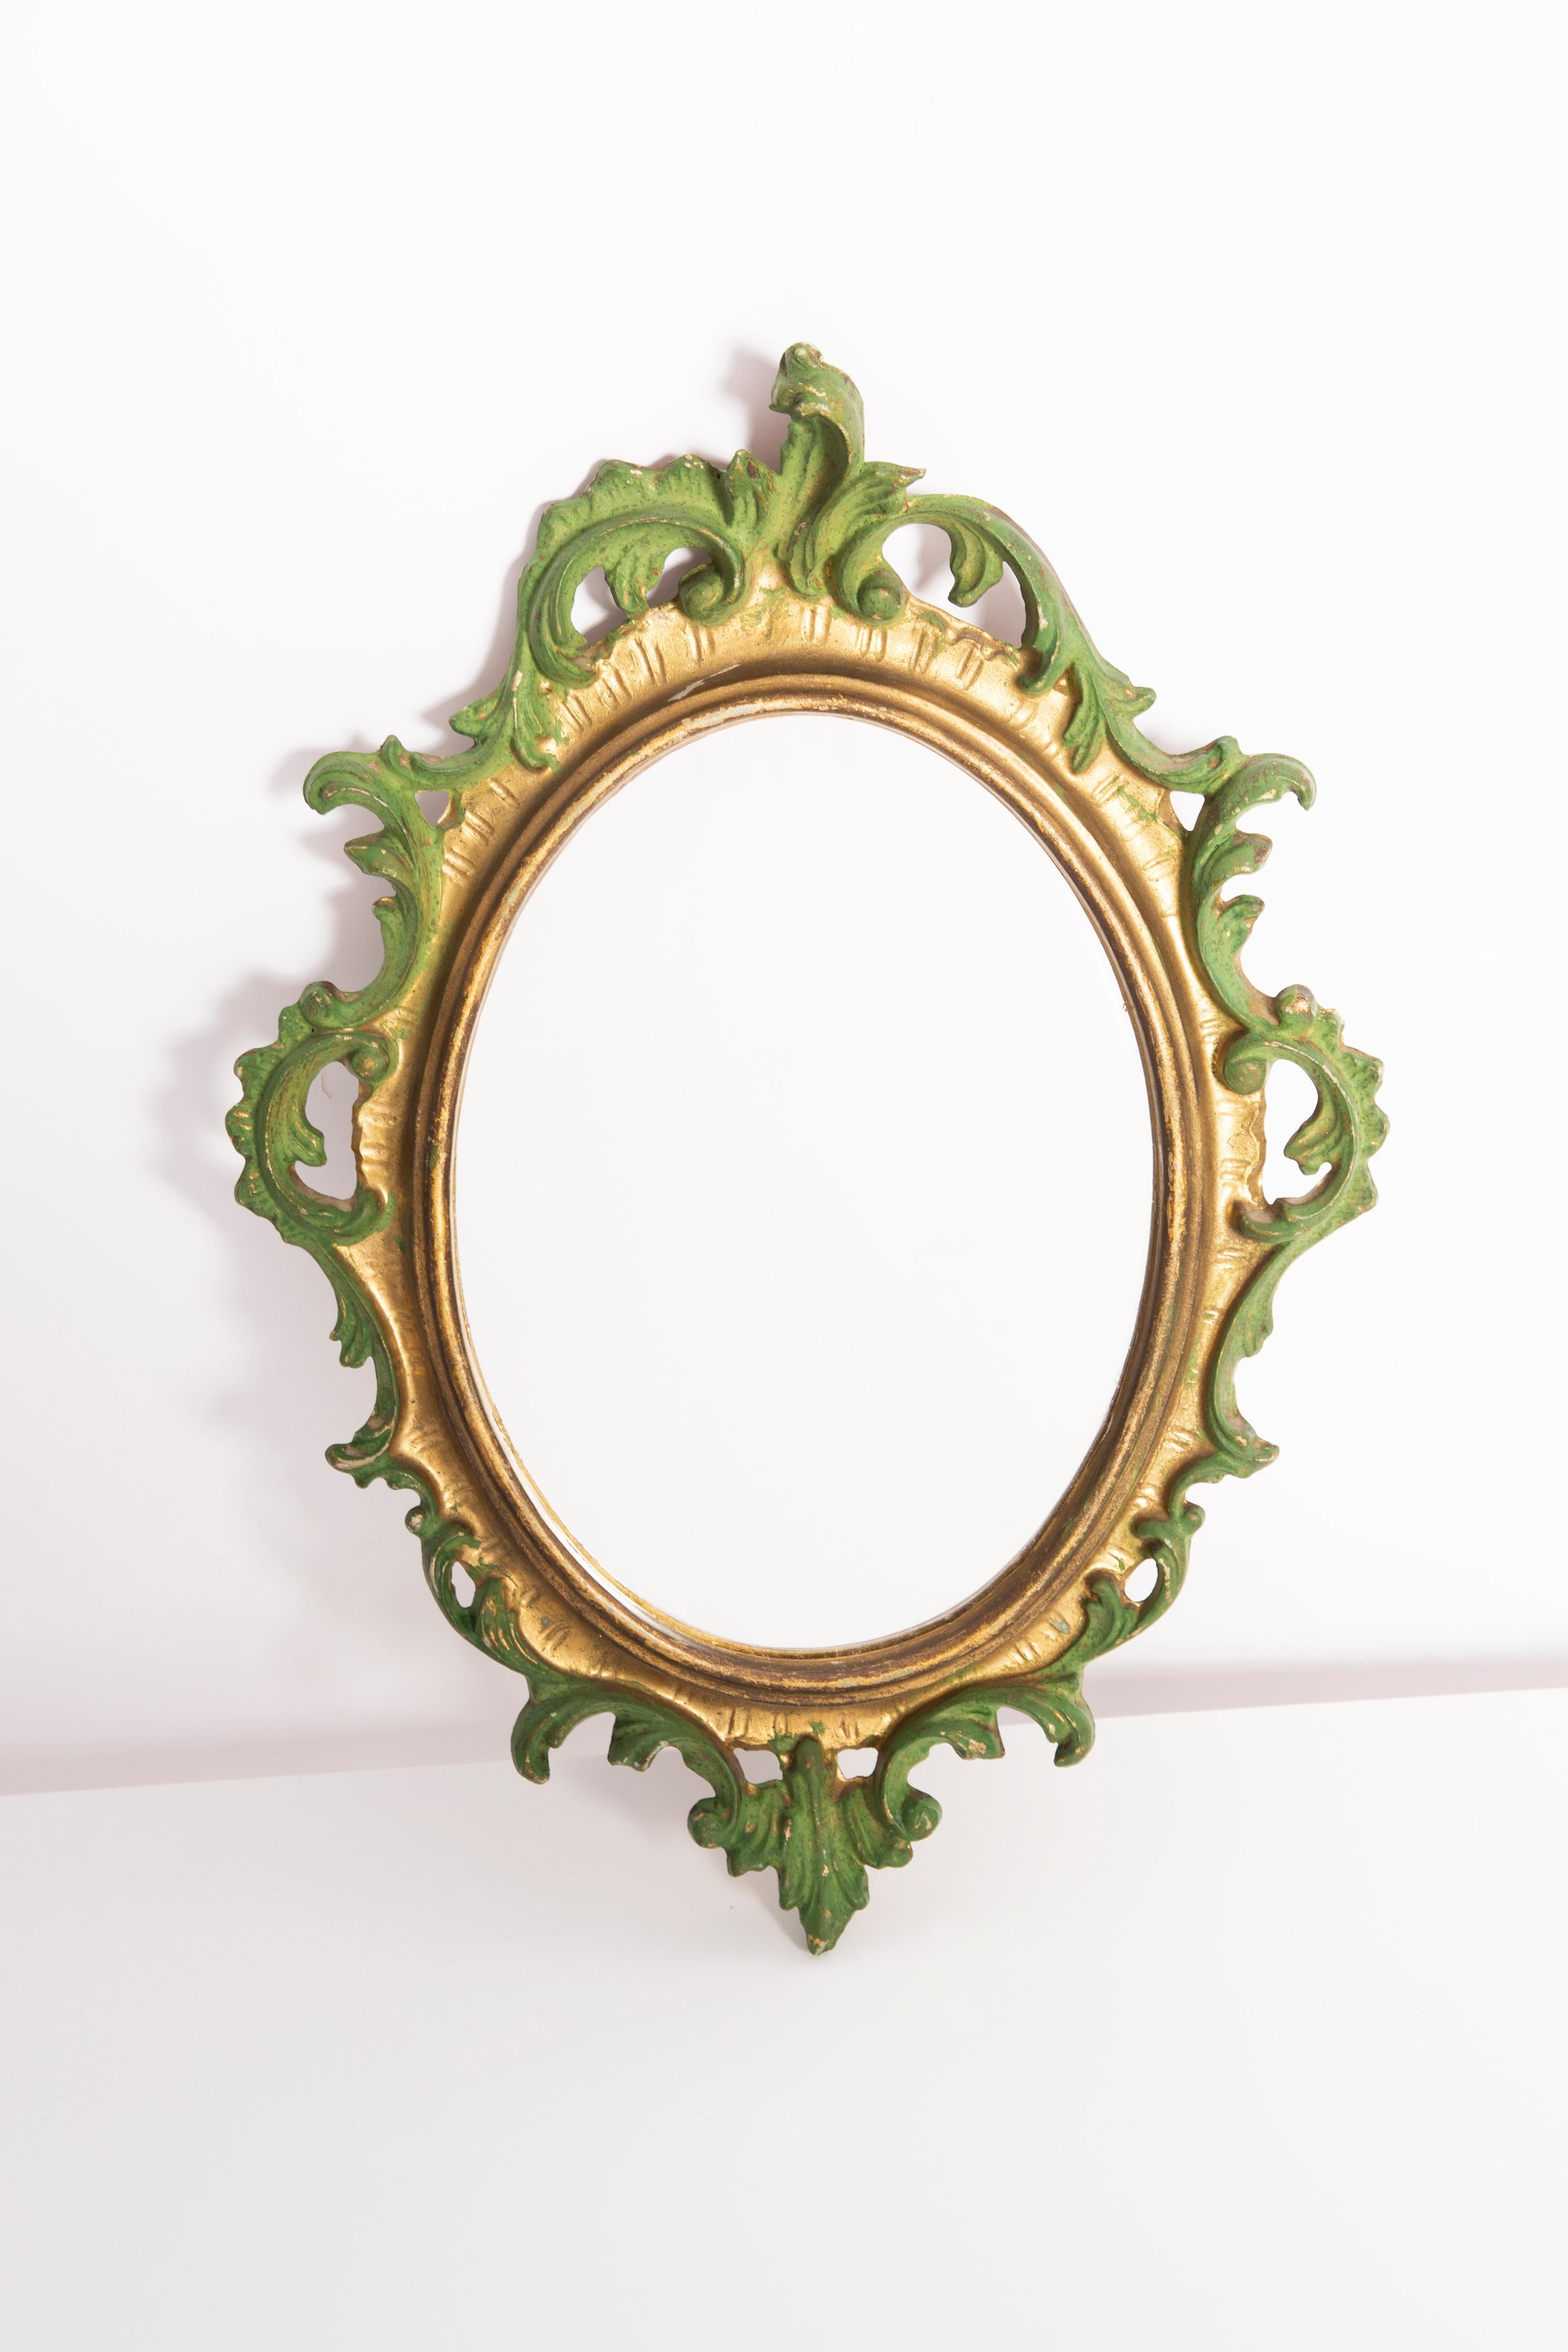 A beautiful small mirror in a golden decorative frame with flowers. Produced in 1960s in Europe / Italy. The frame is made of wood, painted in gold wood paint. Mirror is in very good vintage condition, no damage or cracks in the frame. Original